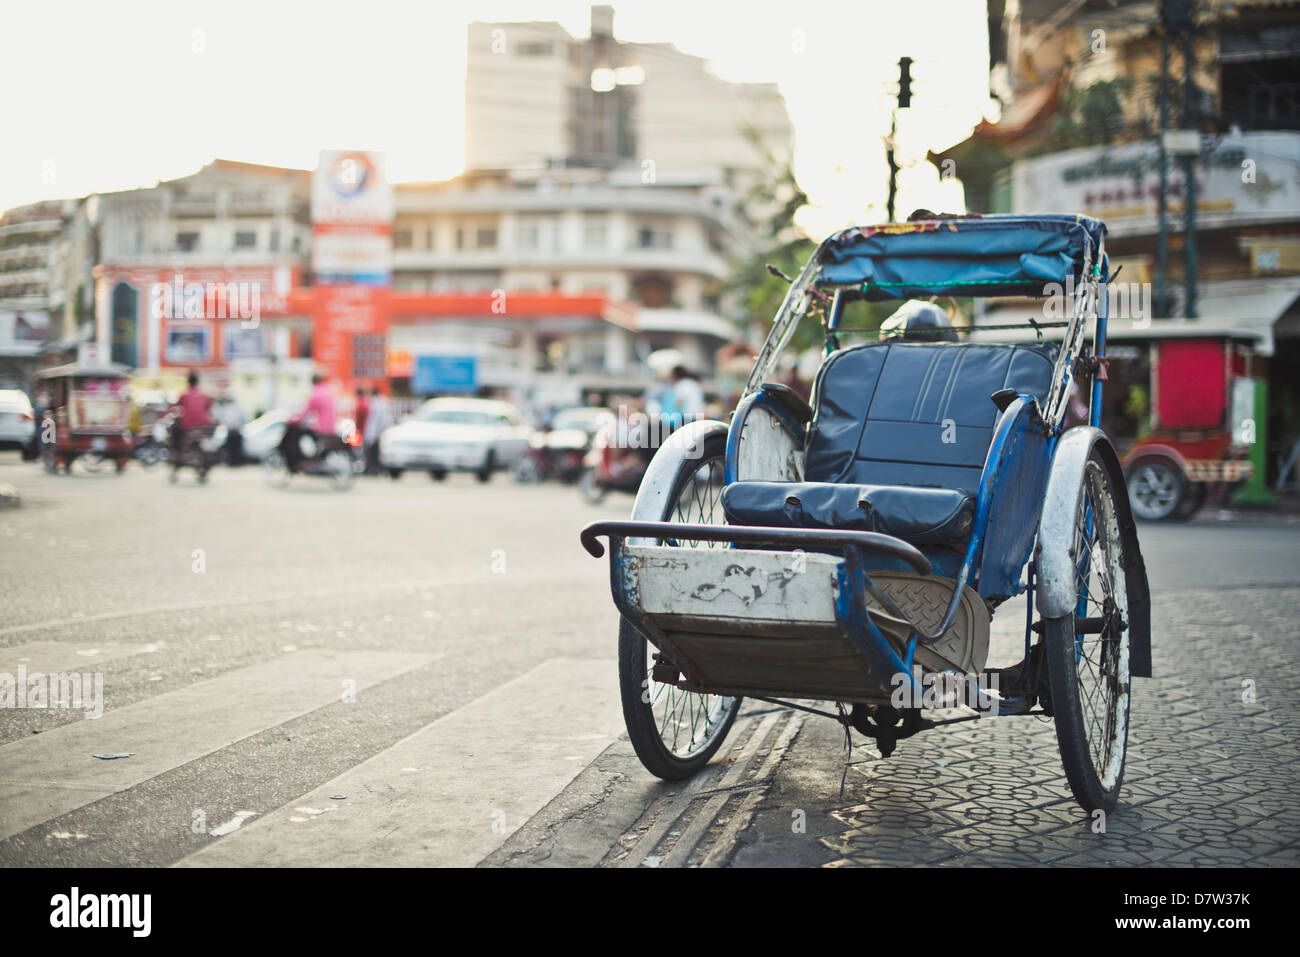 A cyclo parked on the side of the road, transportation in Cambodia Stock Photo